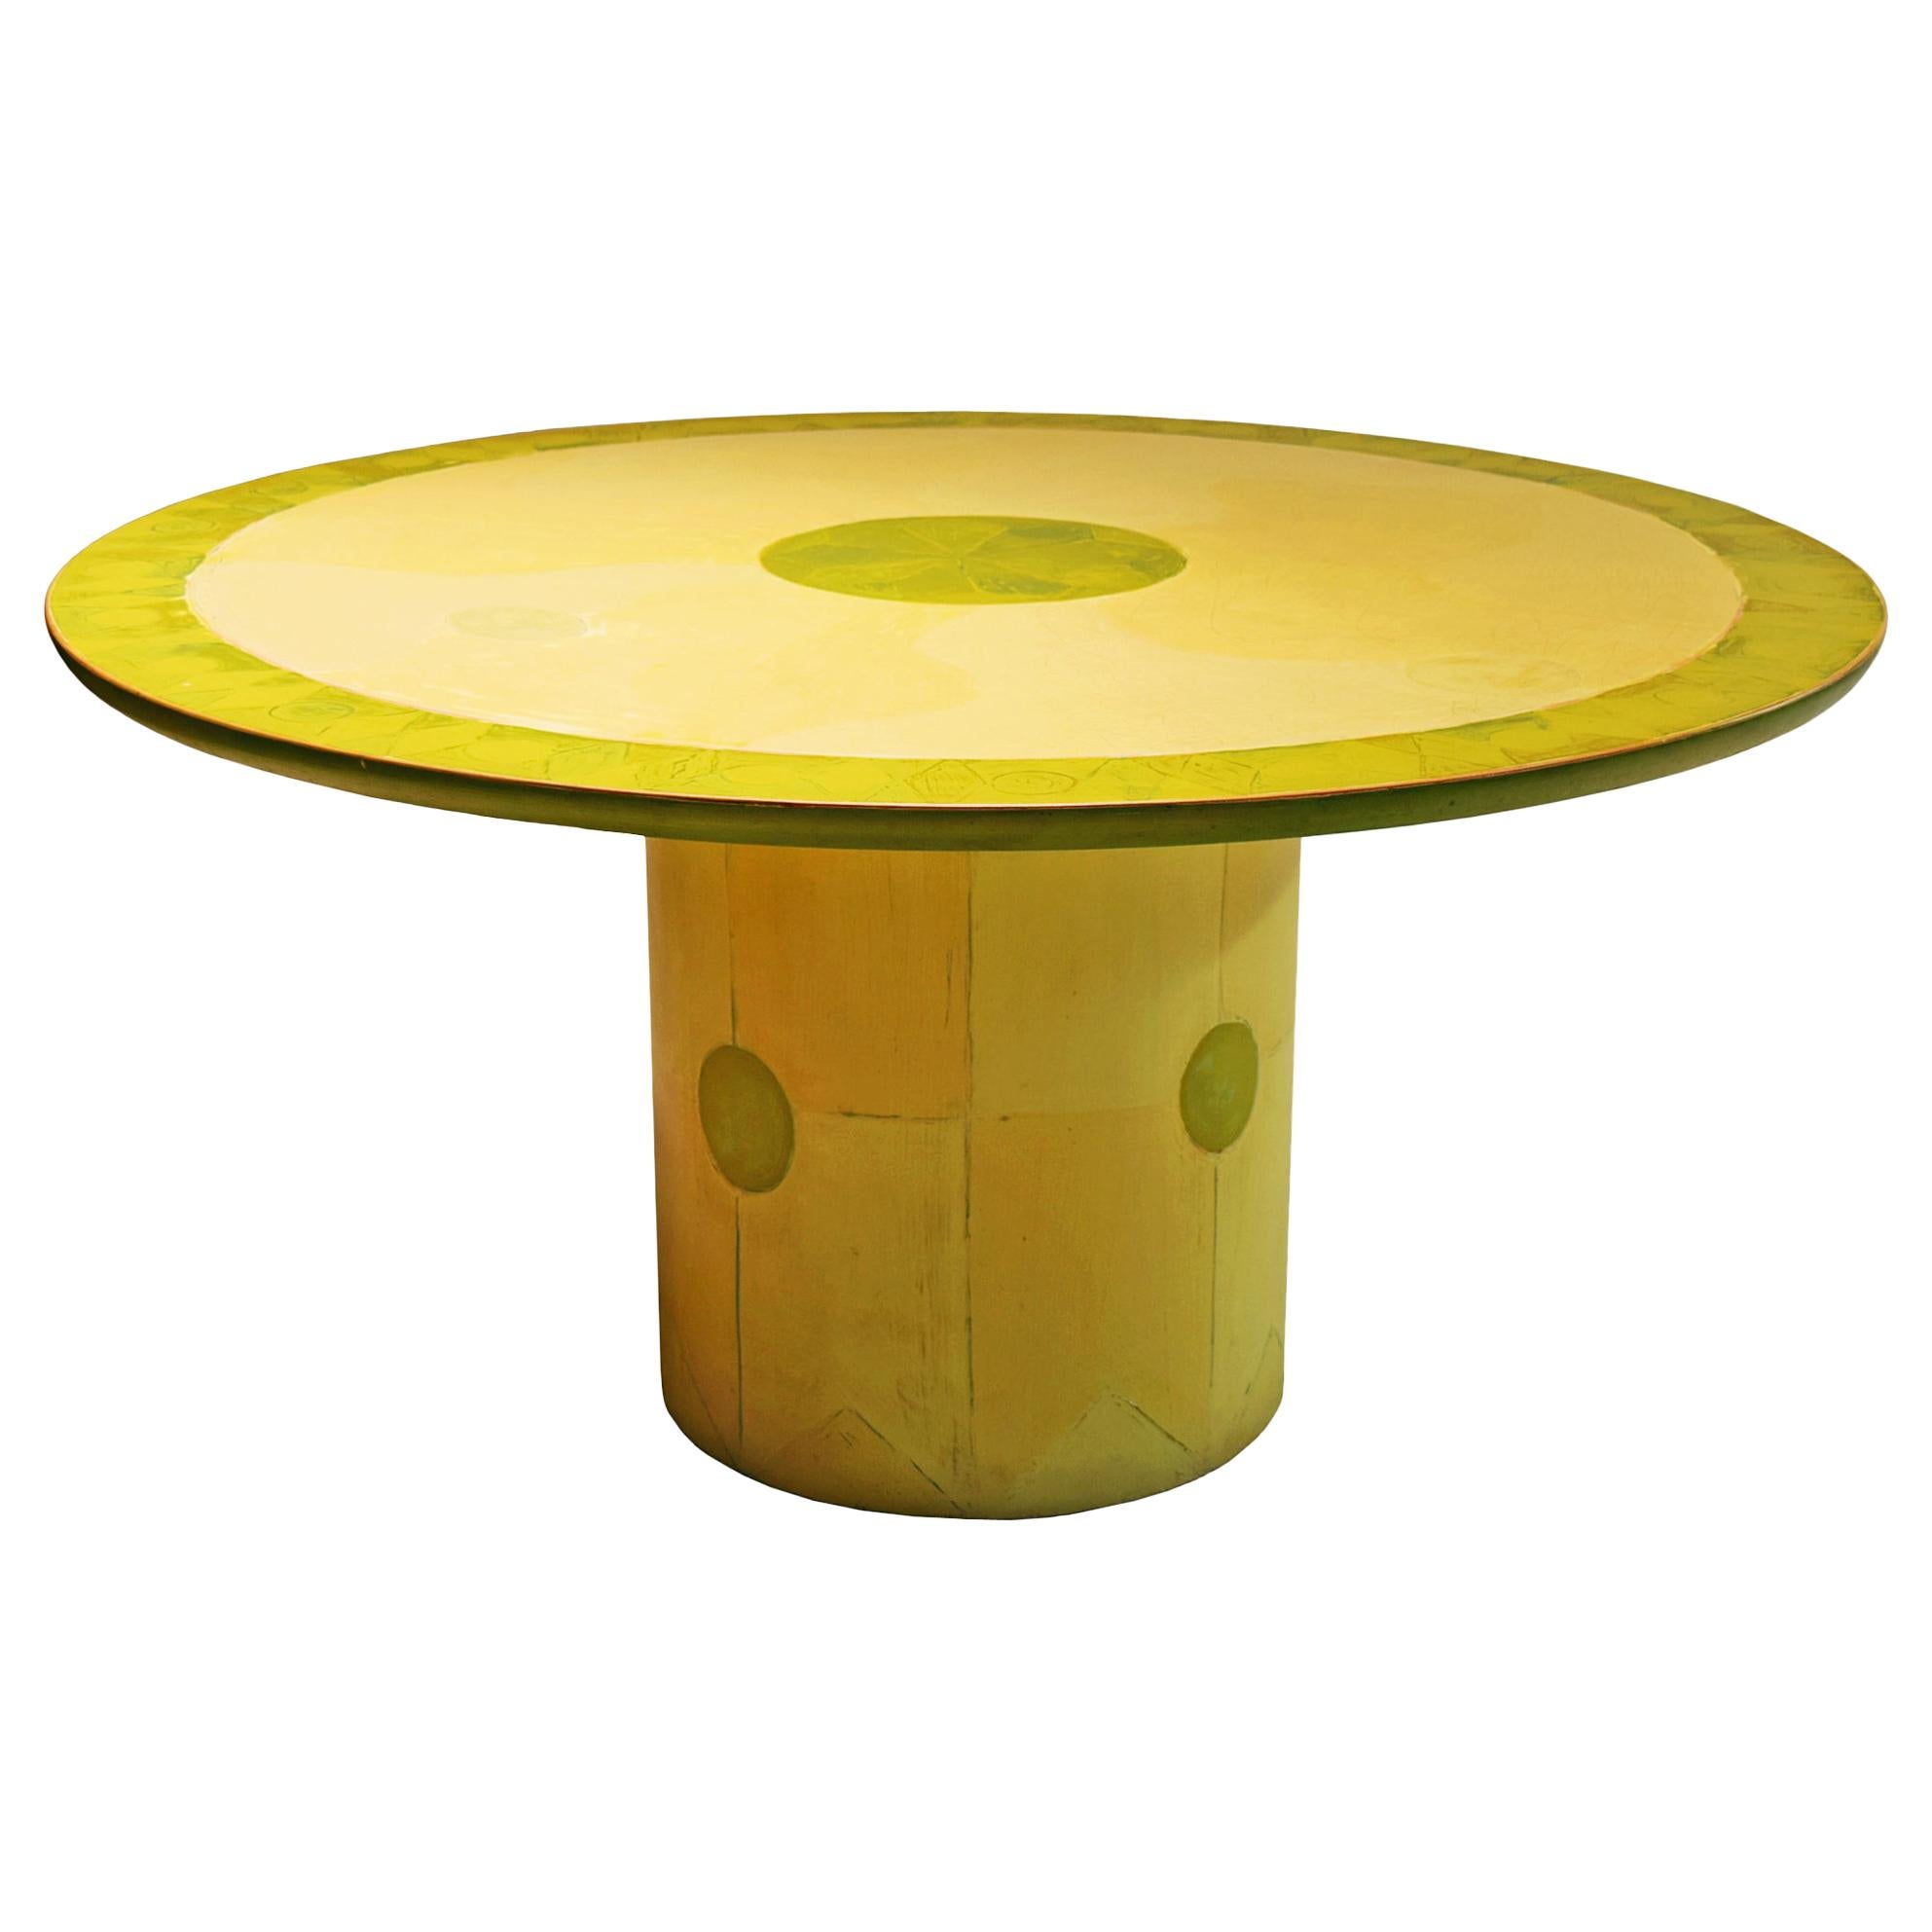 Round Dining or Center Table by Randy Shull, USA, 1999